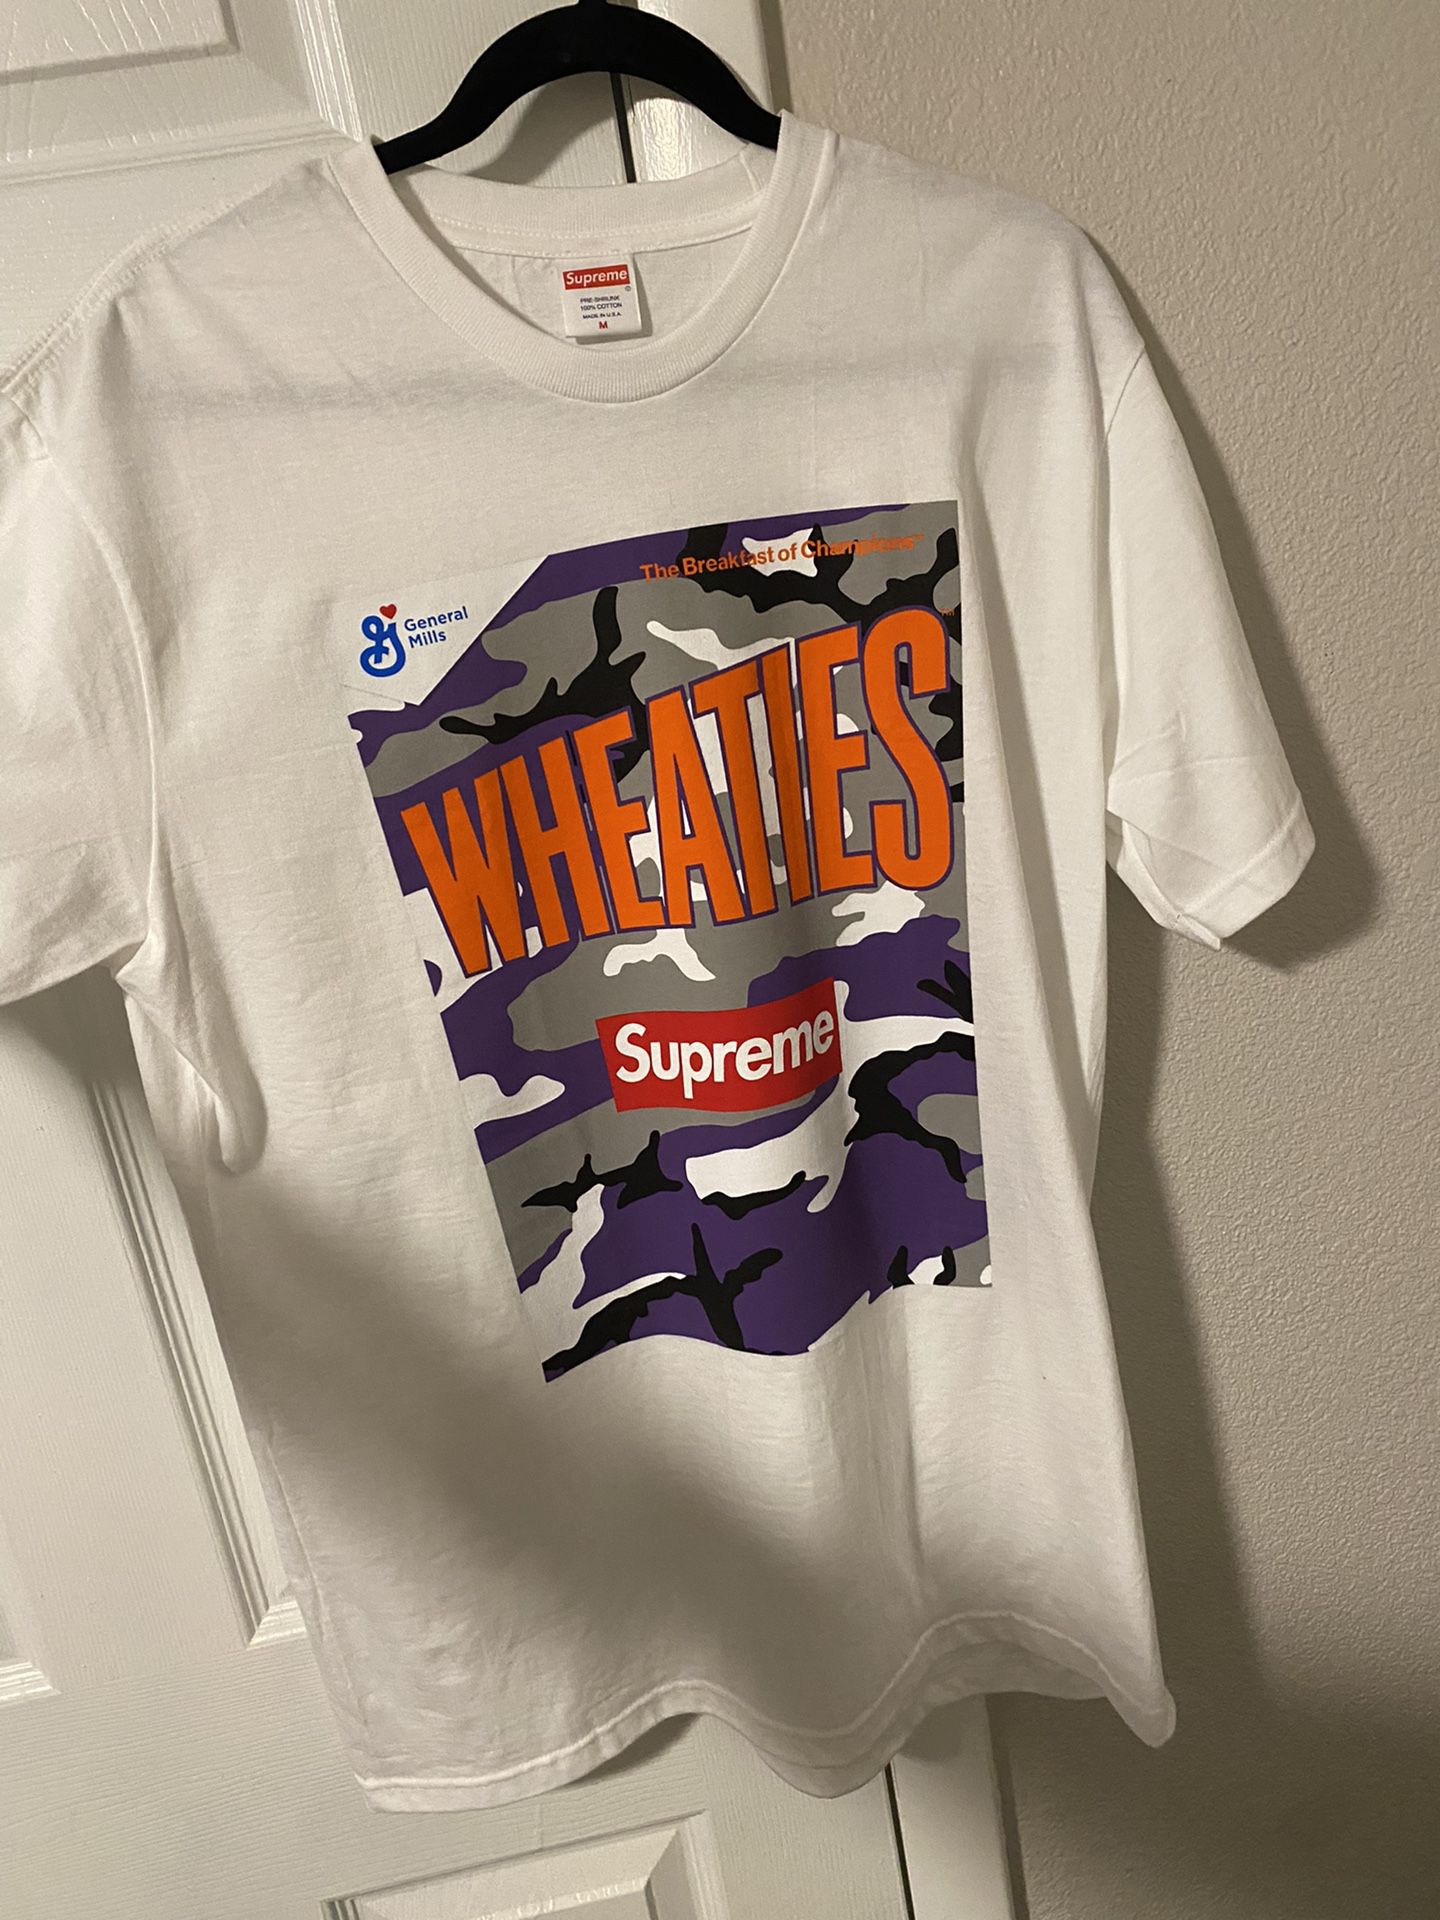 Supreme Wheaties Tee Shirt Medium !! for Sale in Greeley, CO - OfferUp